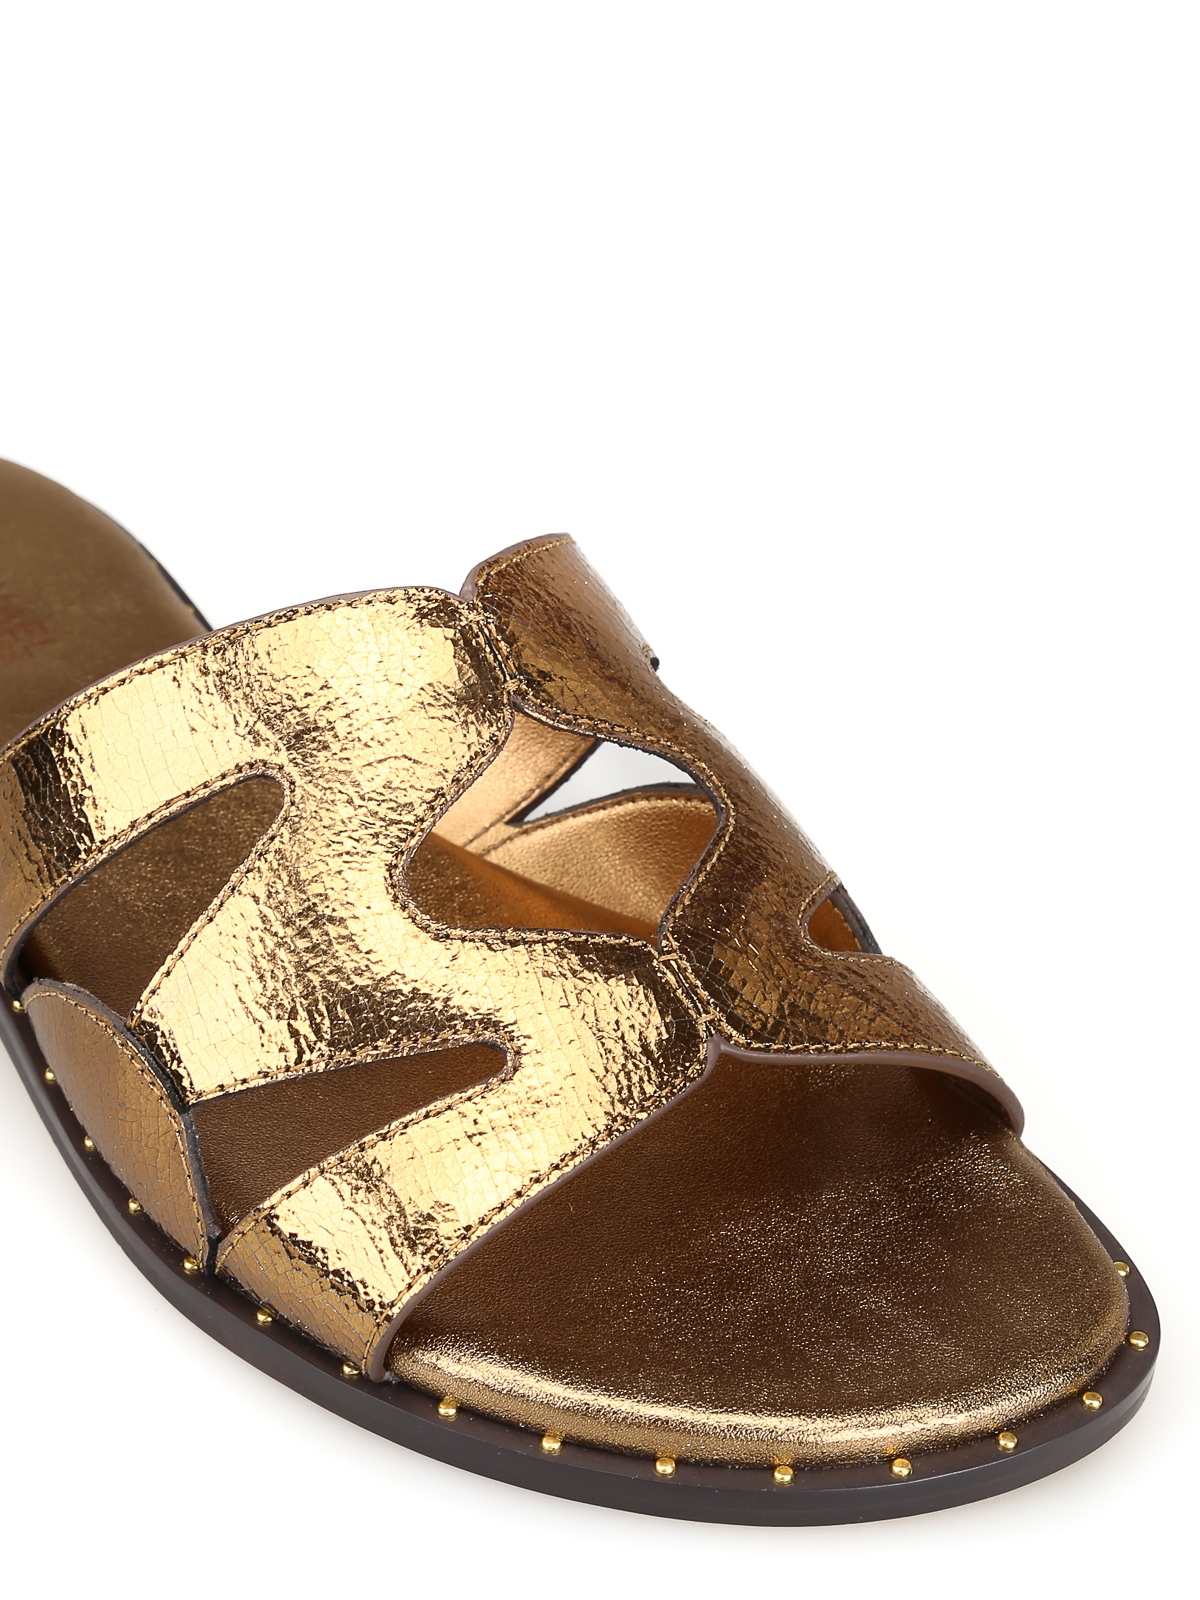 Annalee gold-tone leather slide sandals 